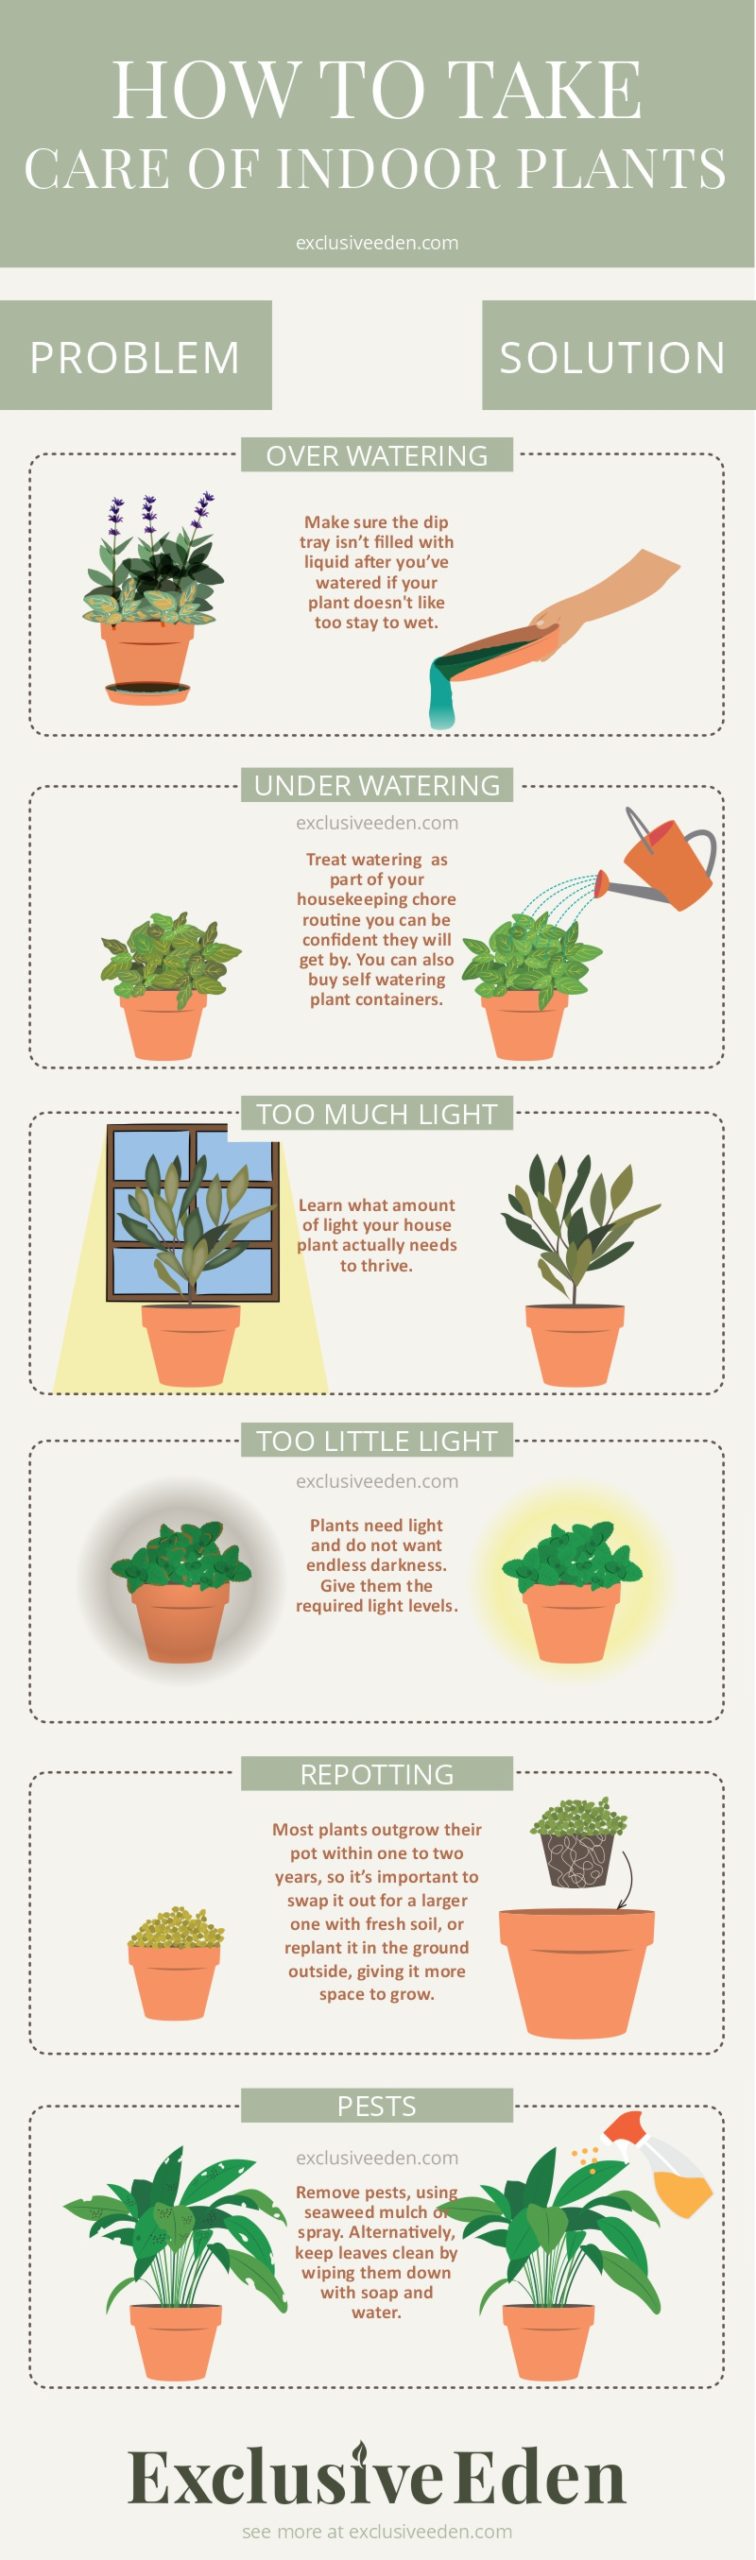 Simple little infographic illustrated guide that gives some tips to take care of indoor plants.